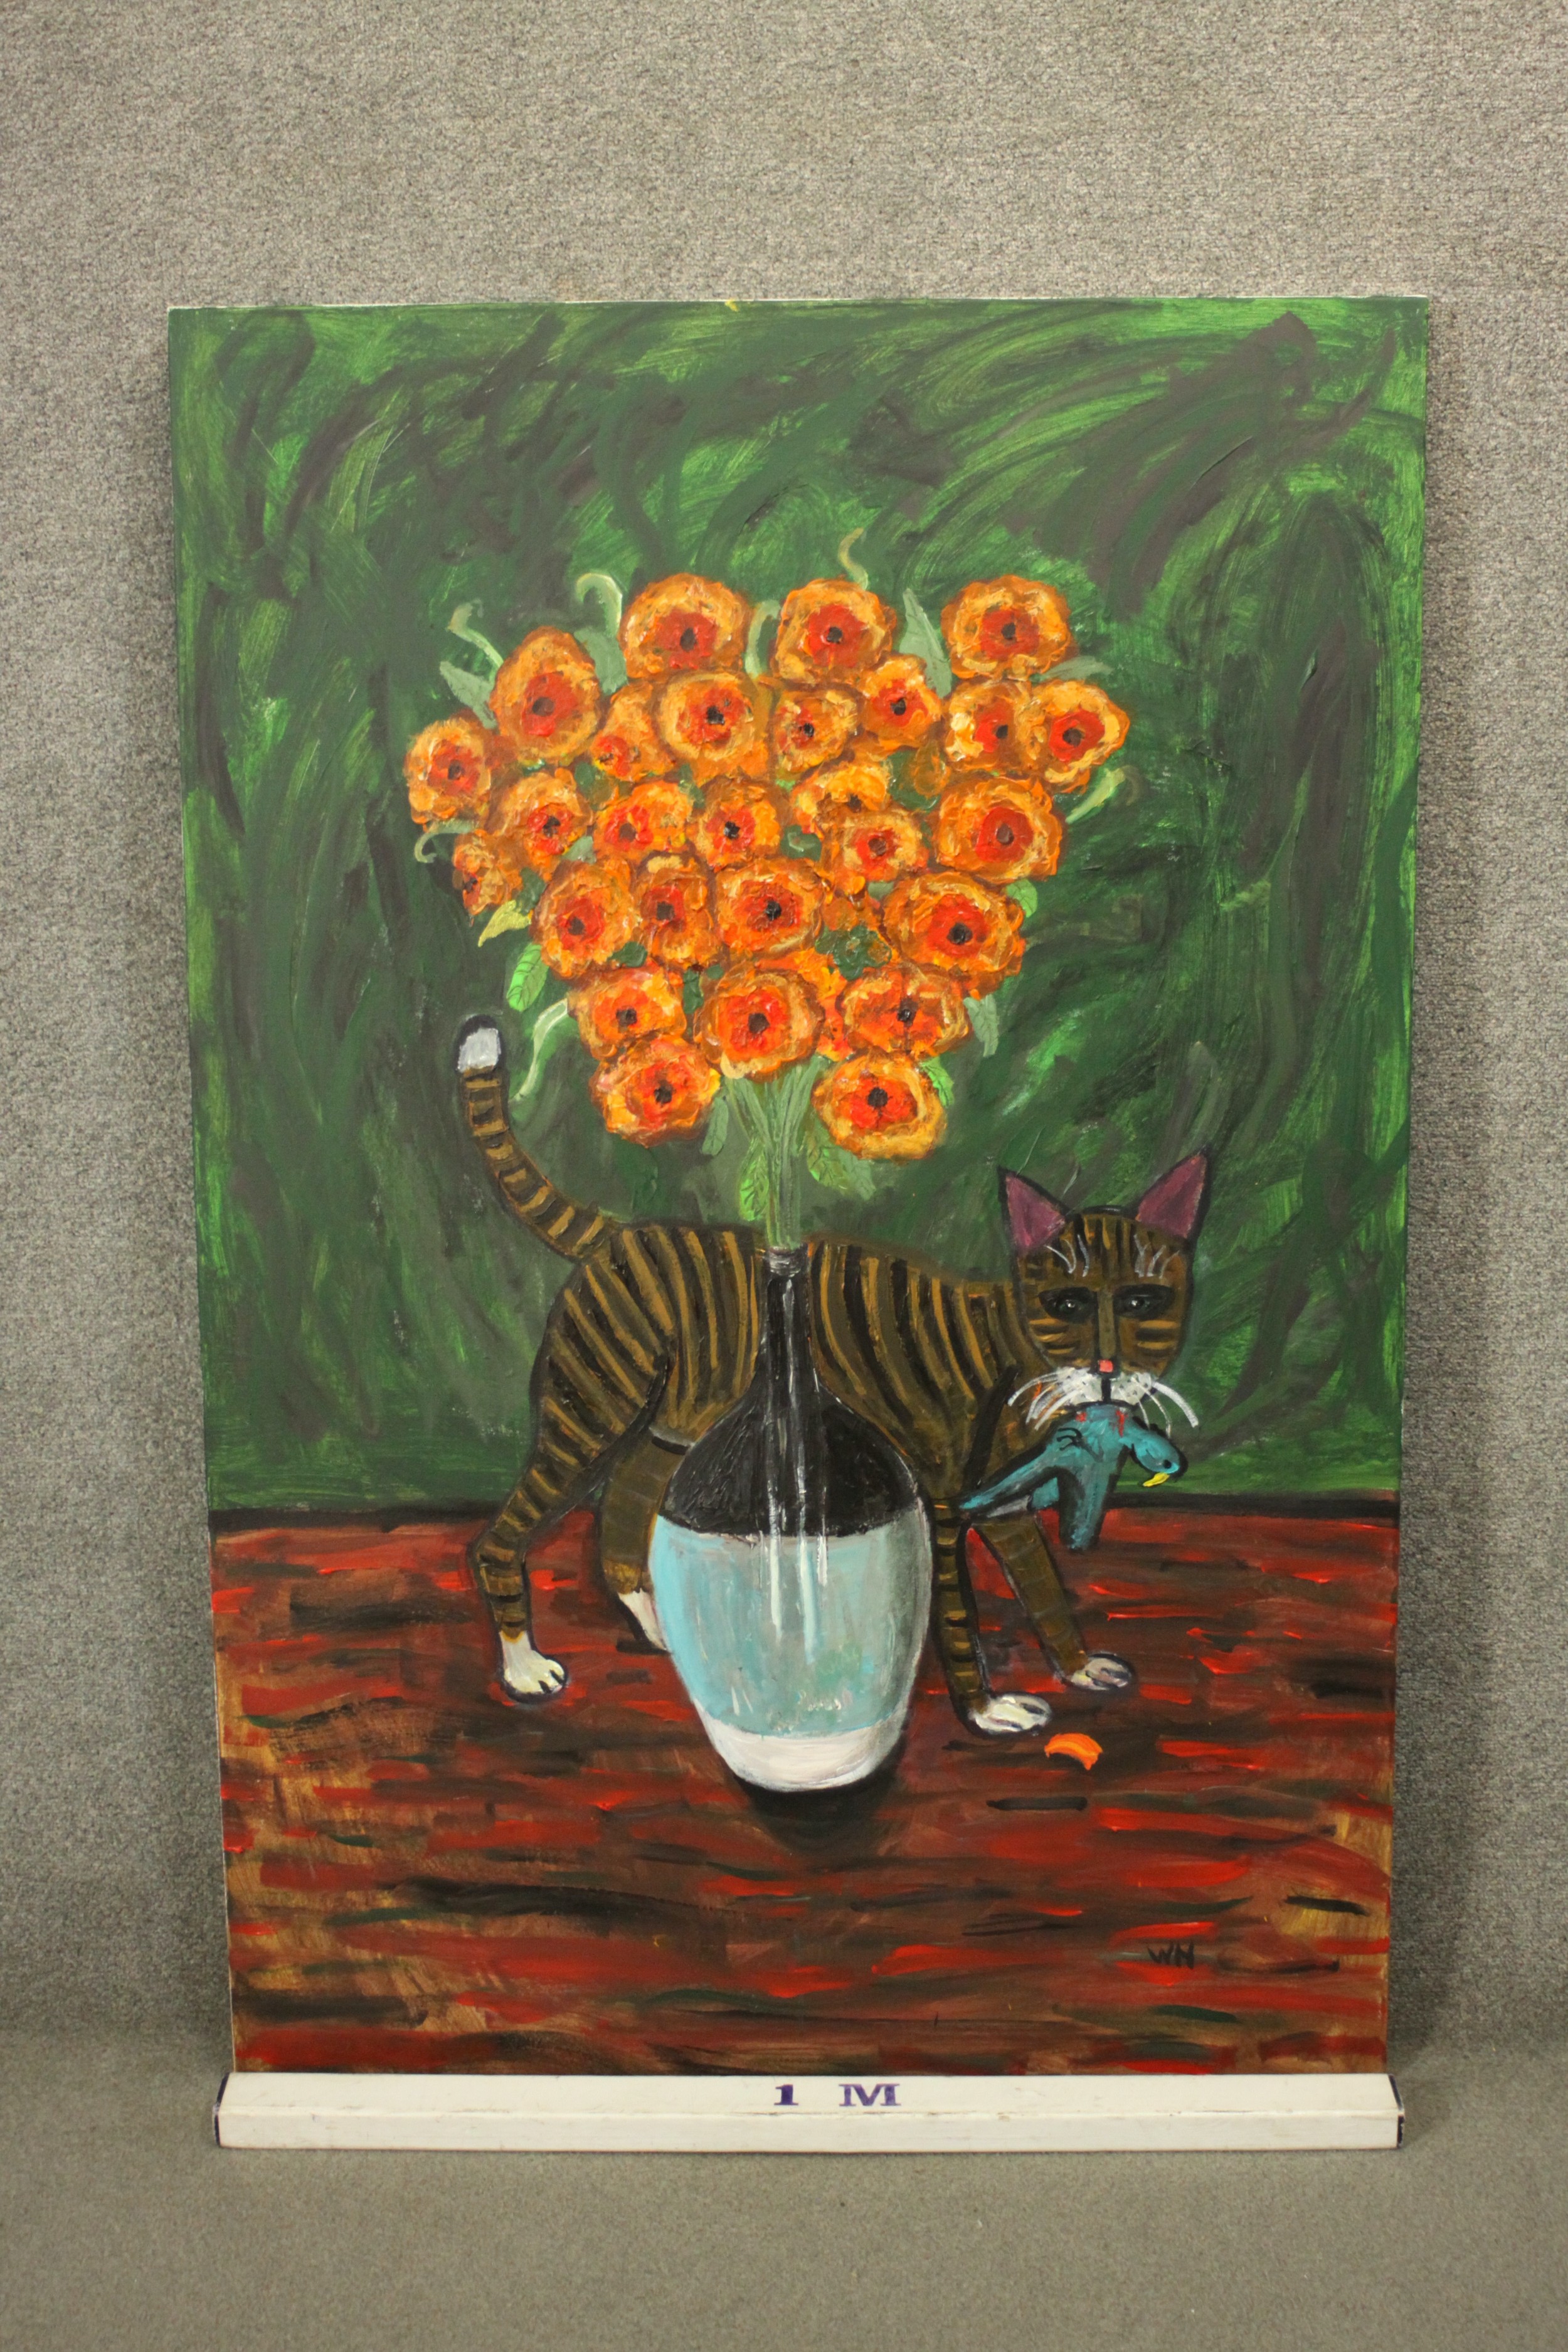 Wolf Howard, acrylic on canvas, still life of a cat with a bird in its mouth in front of a vase of - Image 2 of 8